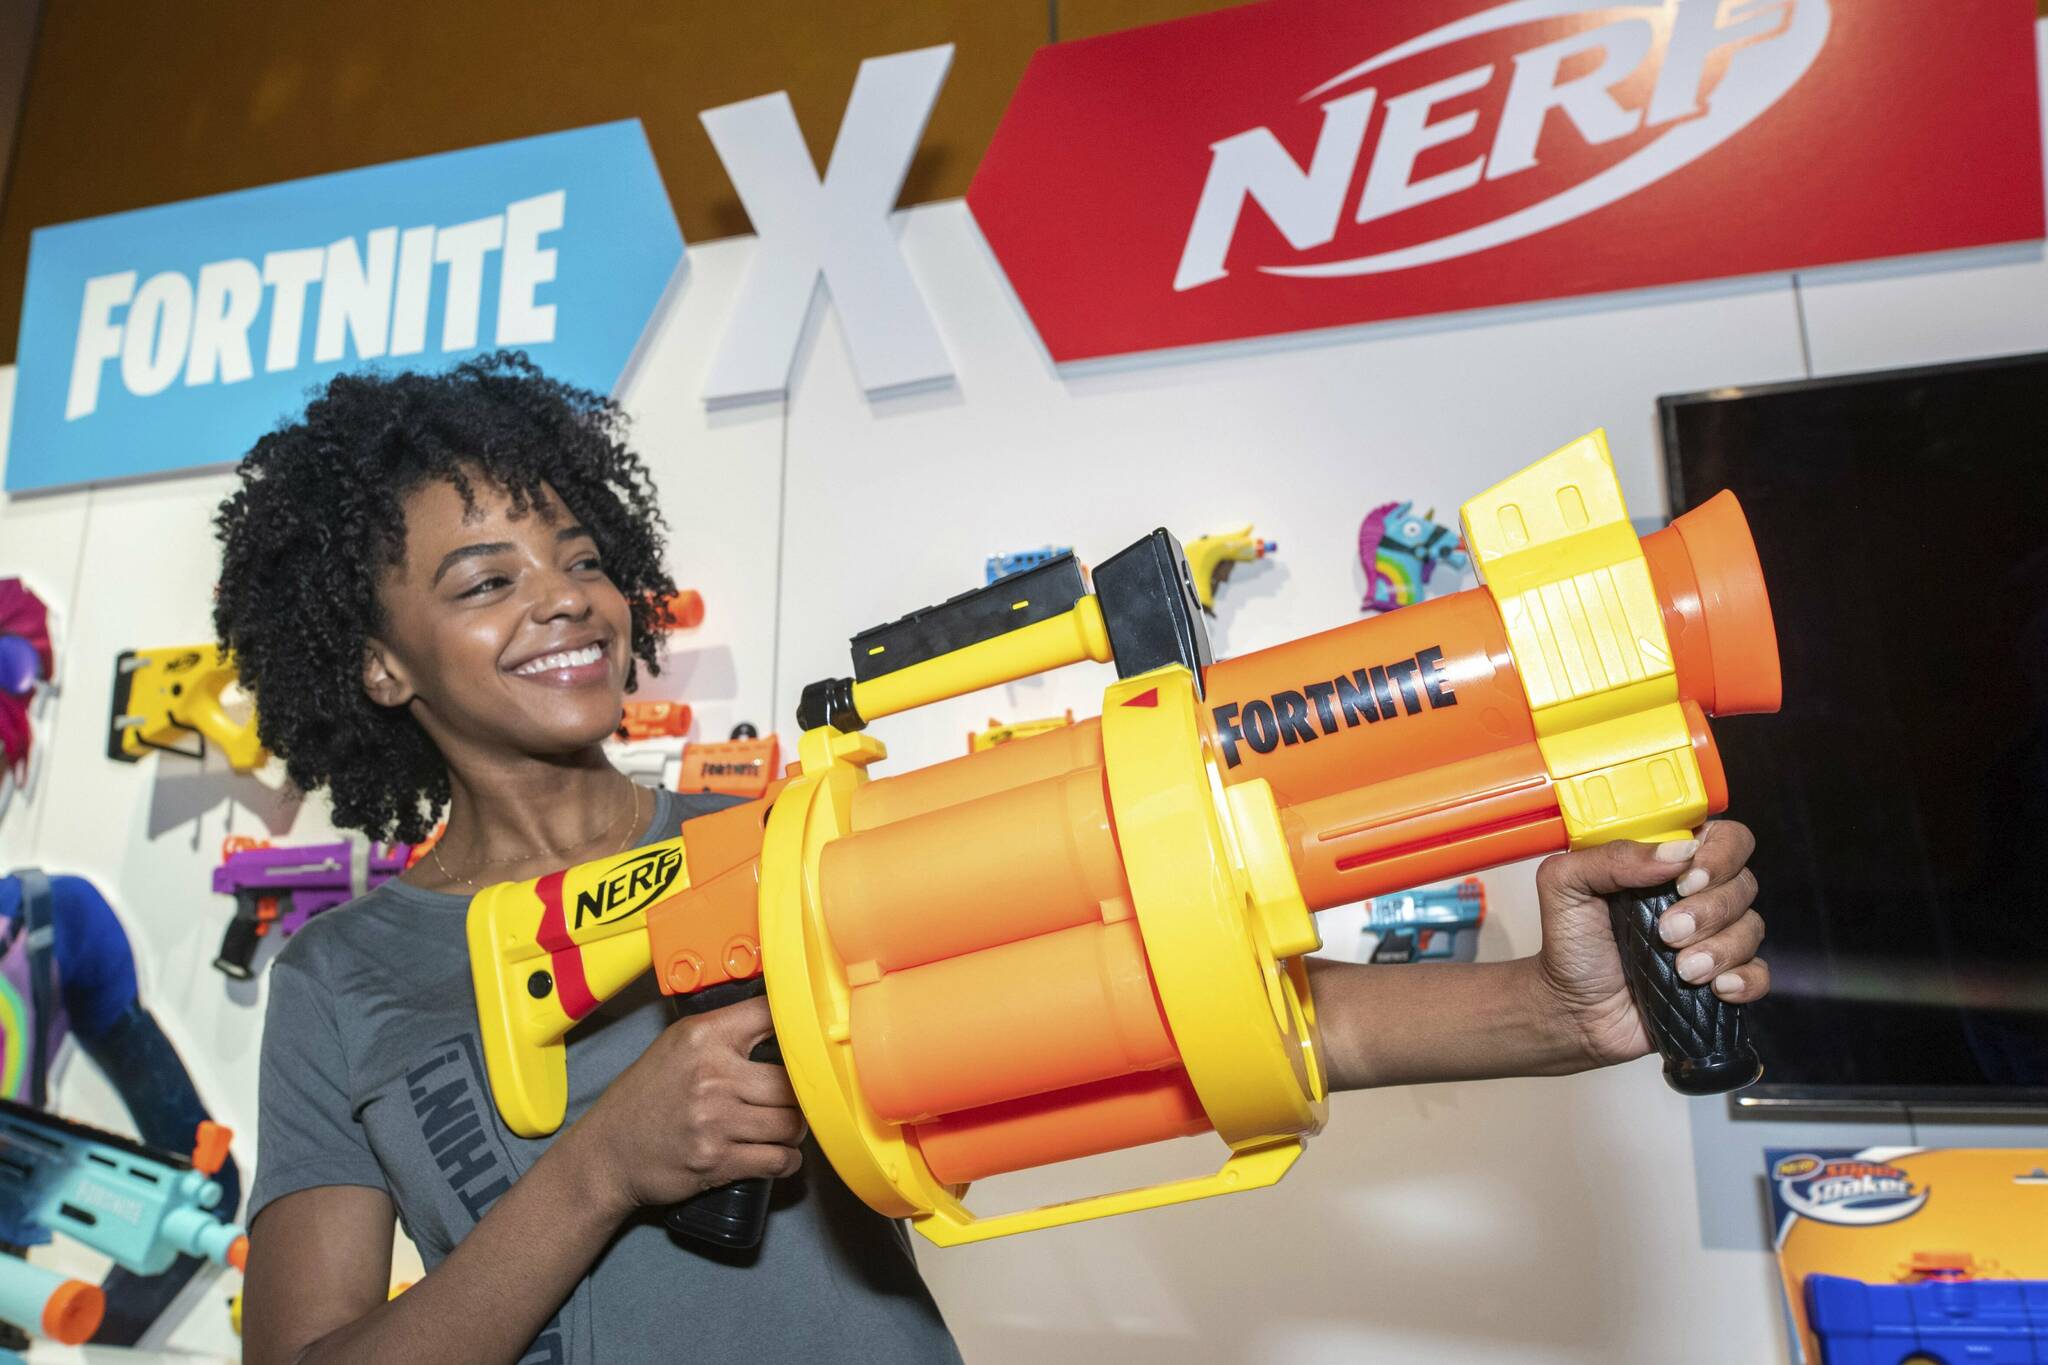 In this photo released on February 23, 2020 the NERF FORTNITE GL ROCKET FIRING Blaster is debuted at the Hasbro, Inc. Showroom during Toy Fair New York. . (Charles Sykes/AP Images for Hasbro)